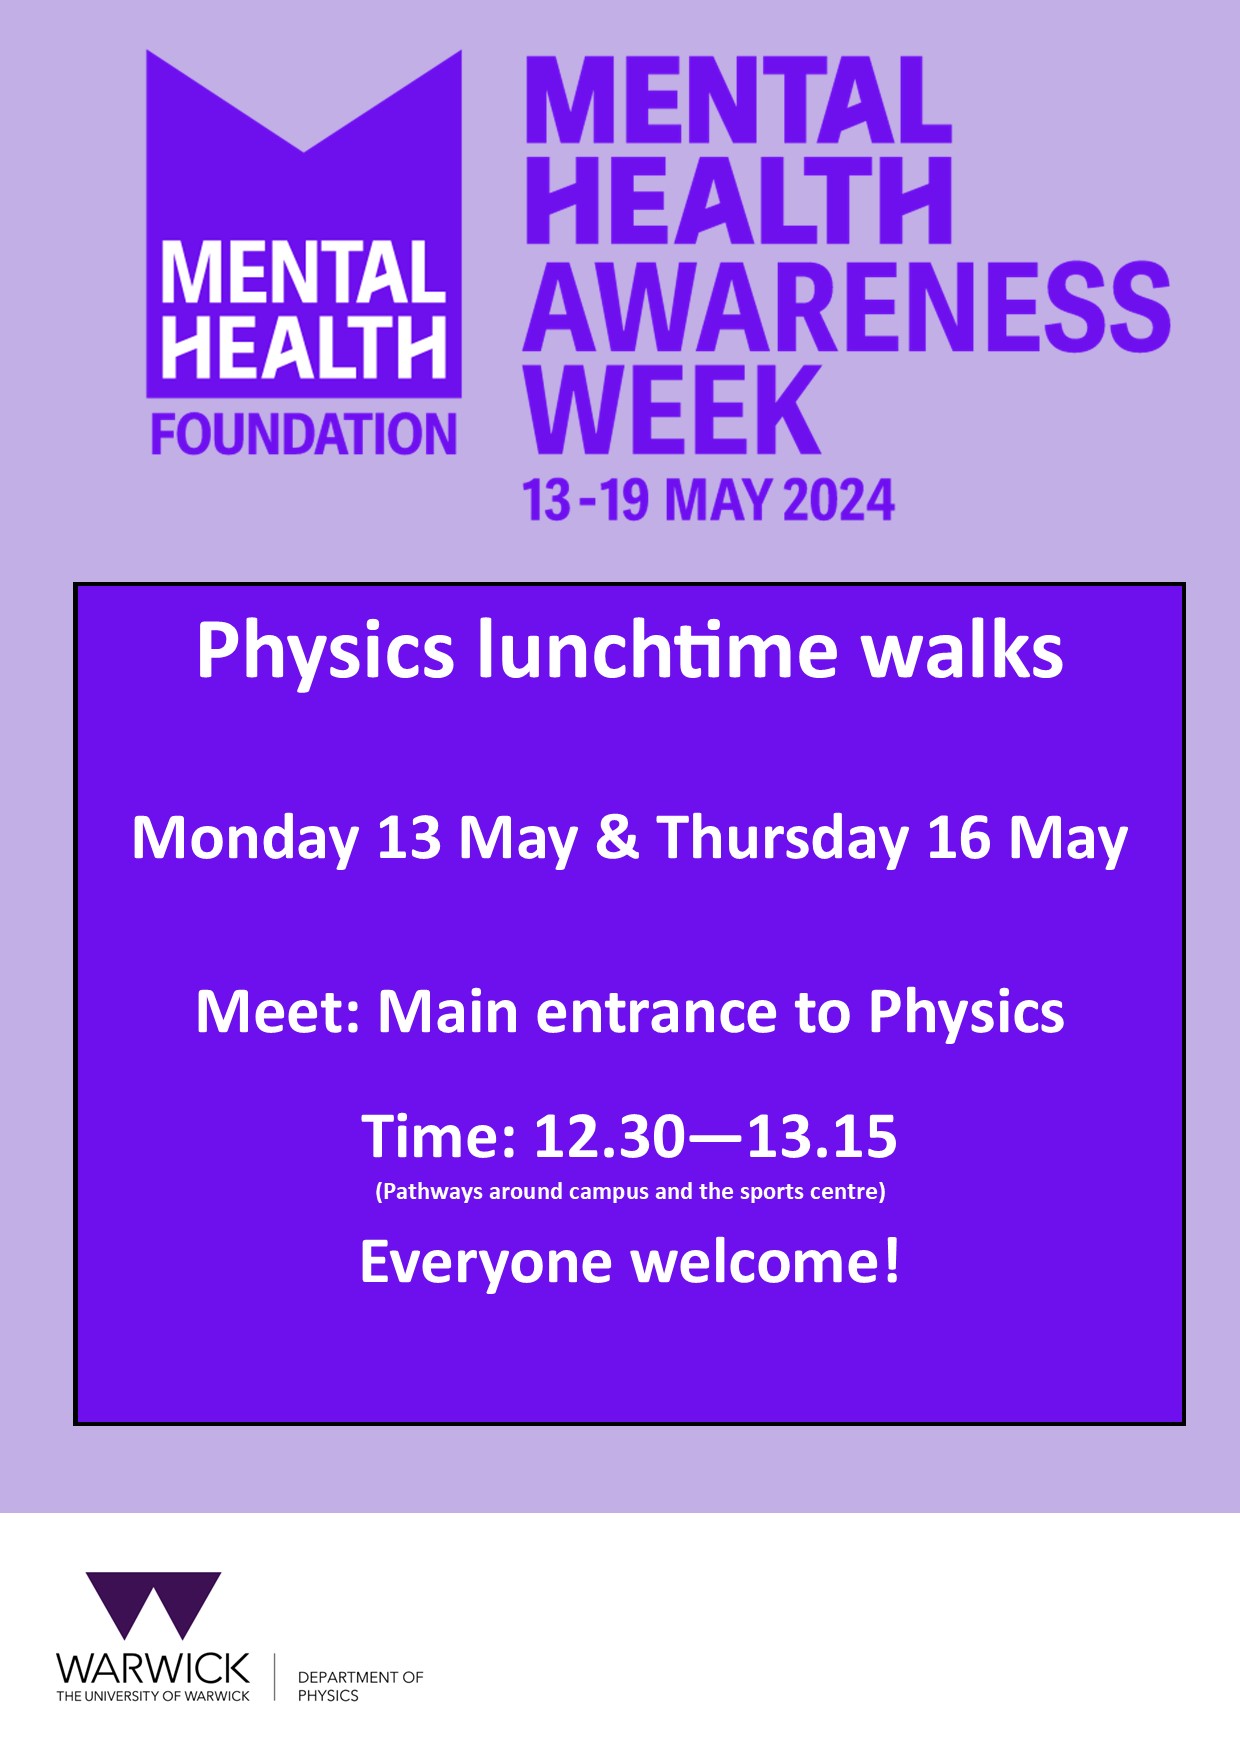 Lunchtime walks to mark mental health awareness week on monday 13 may and thursday 16 may at 12.30